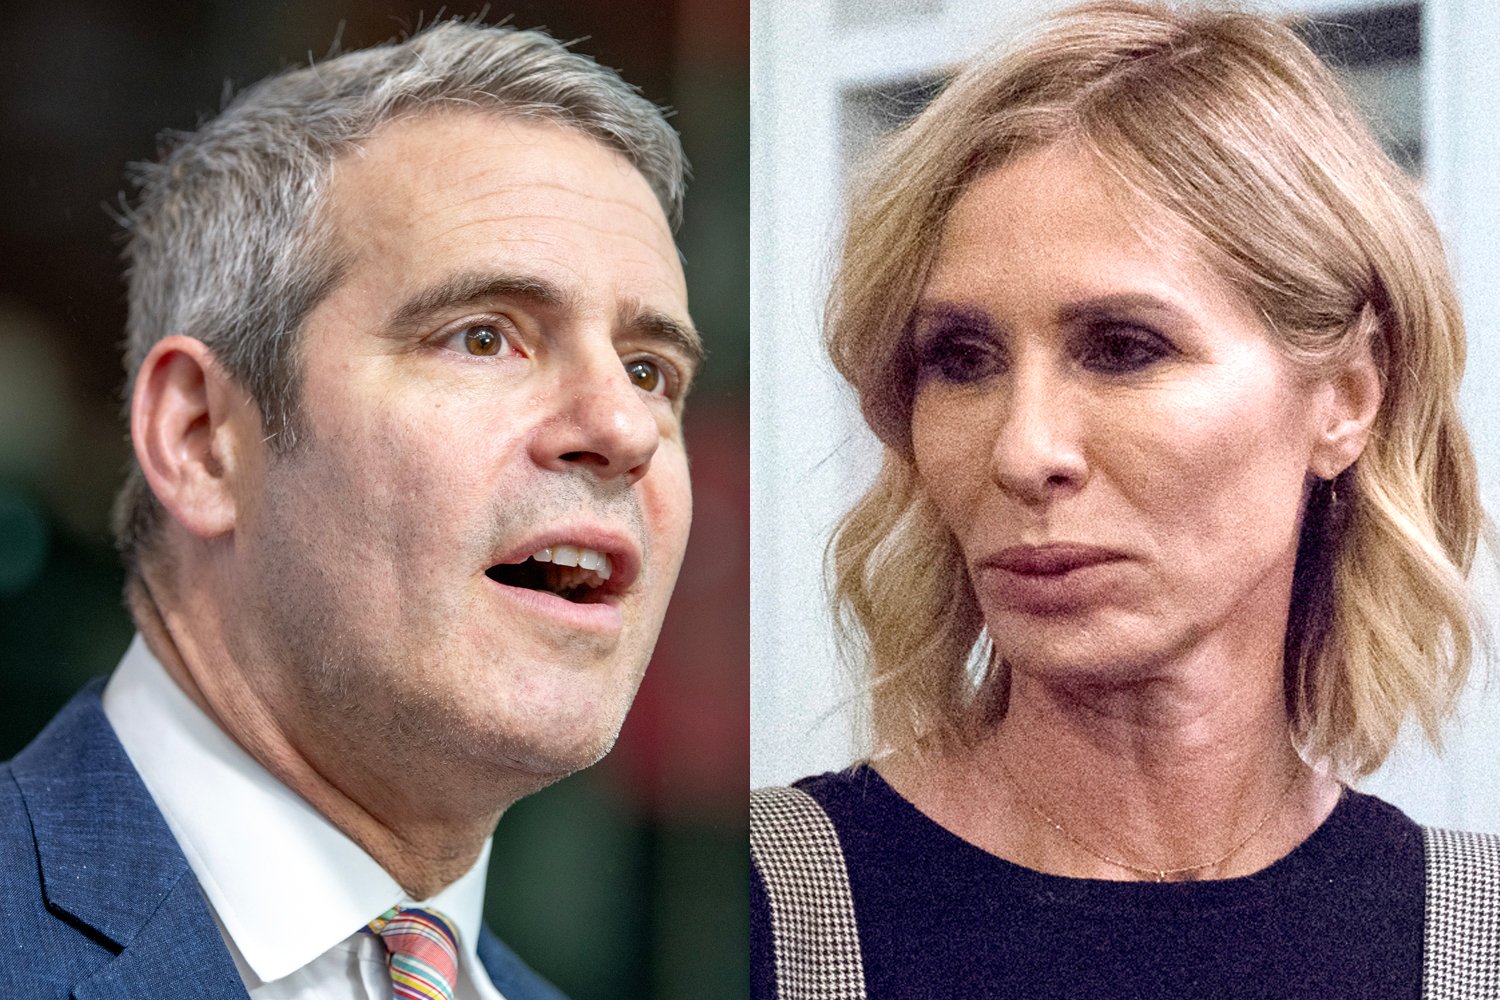 Andy Cohen Breaks Silence and Reacts After ‘RHONY’ Alum Carole Radziwill Put Him on Blast